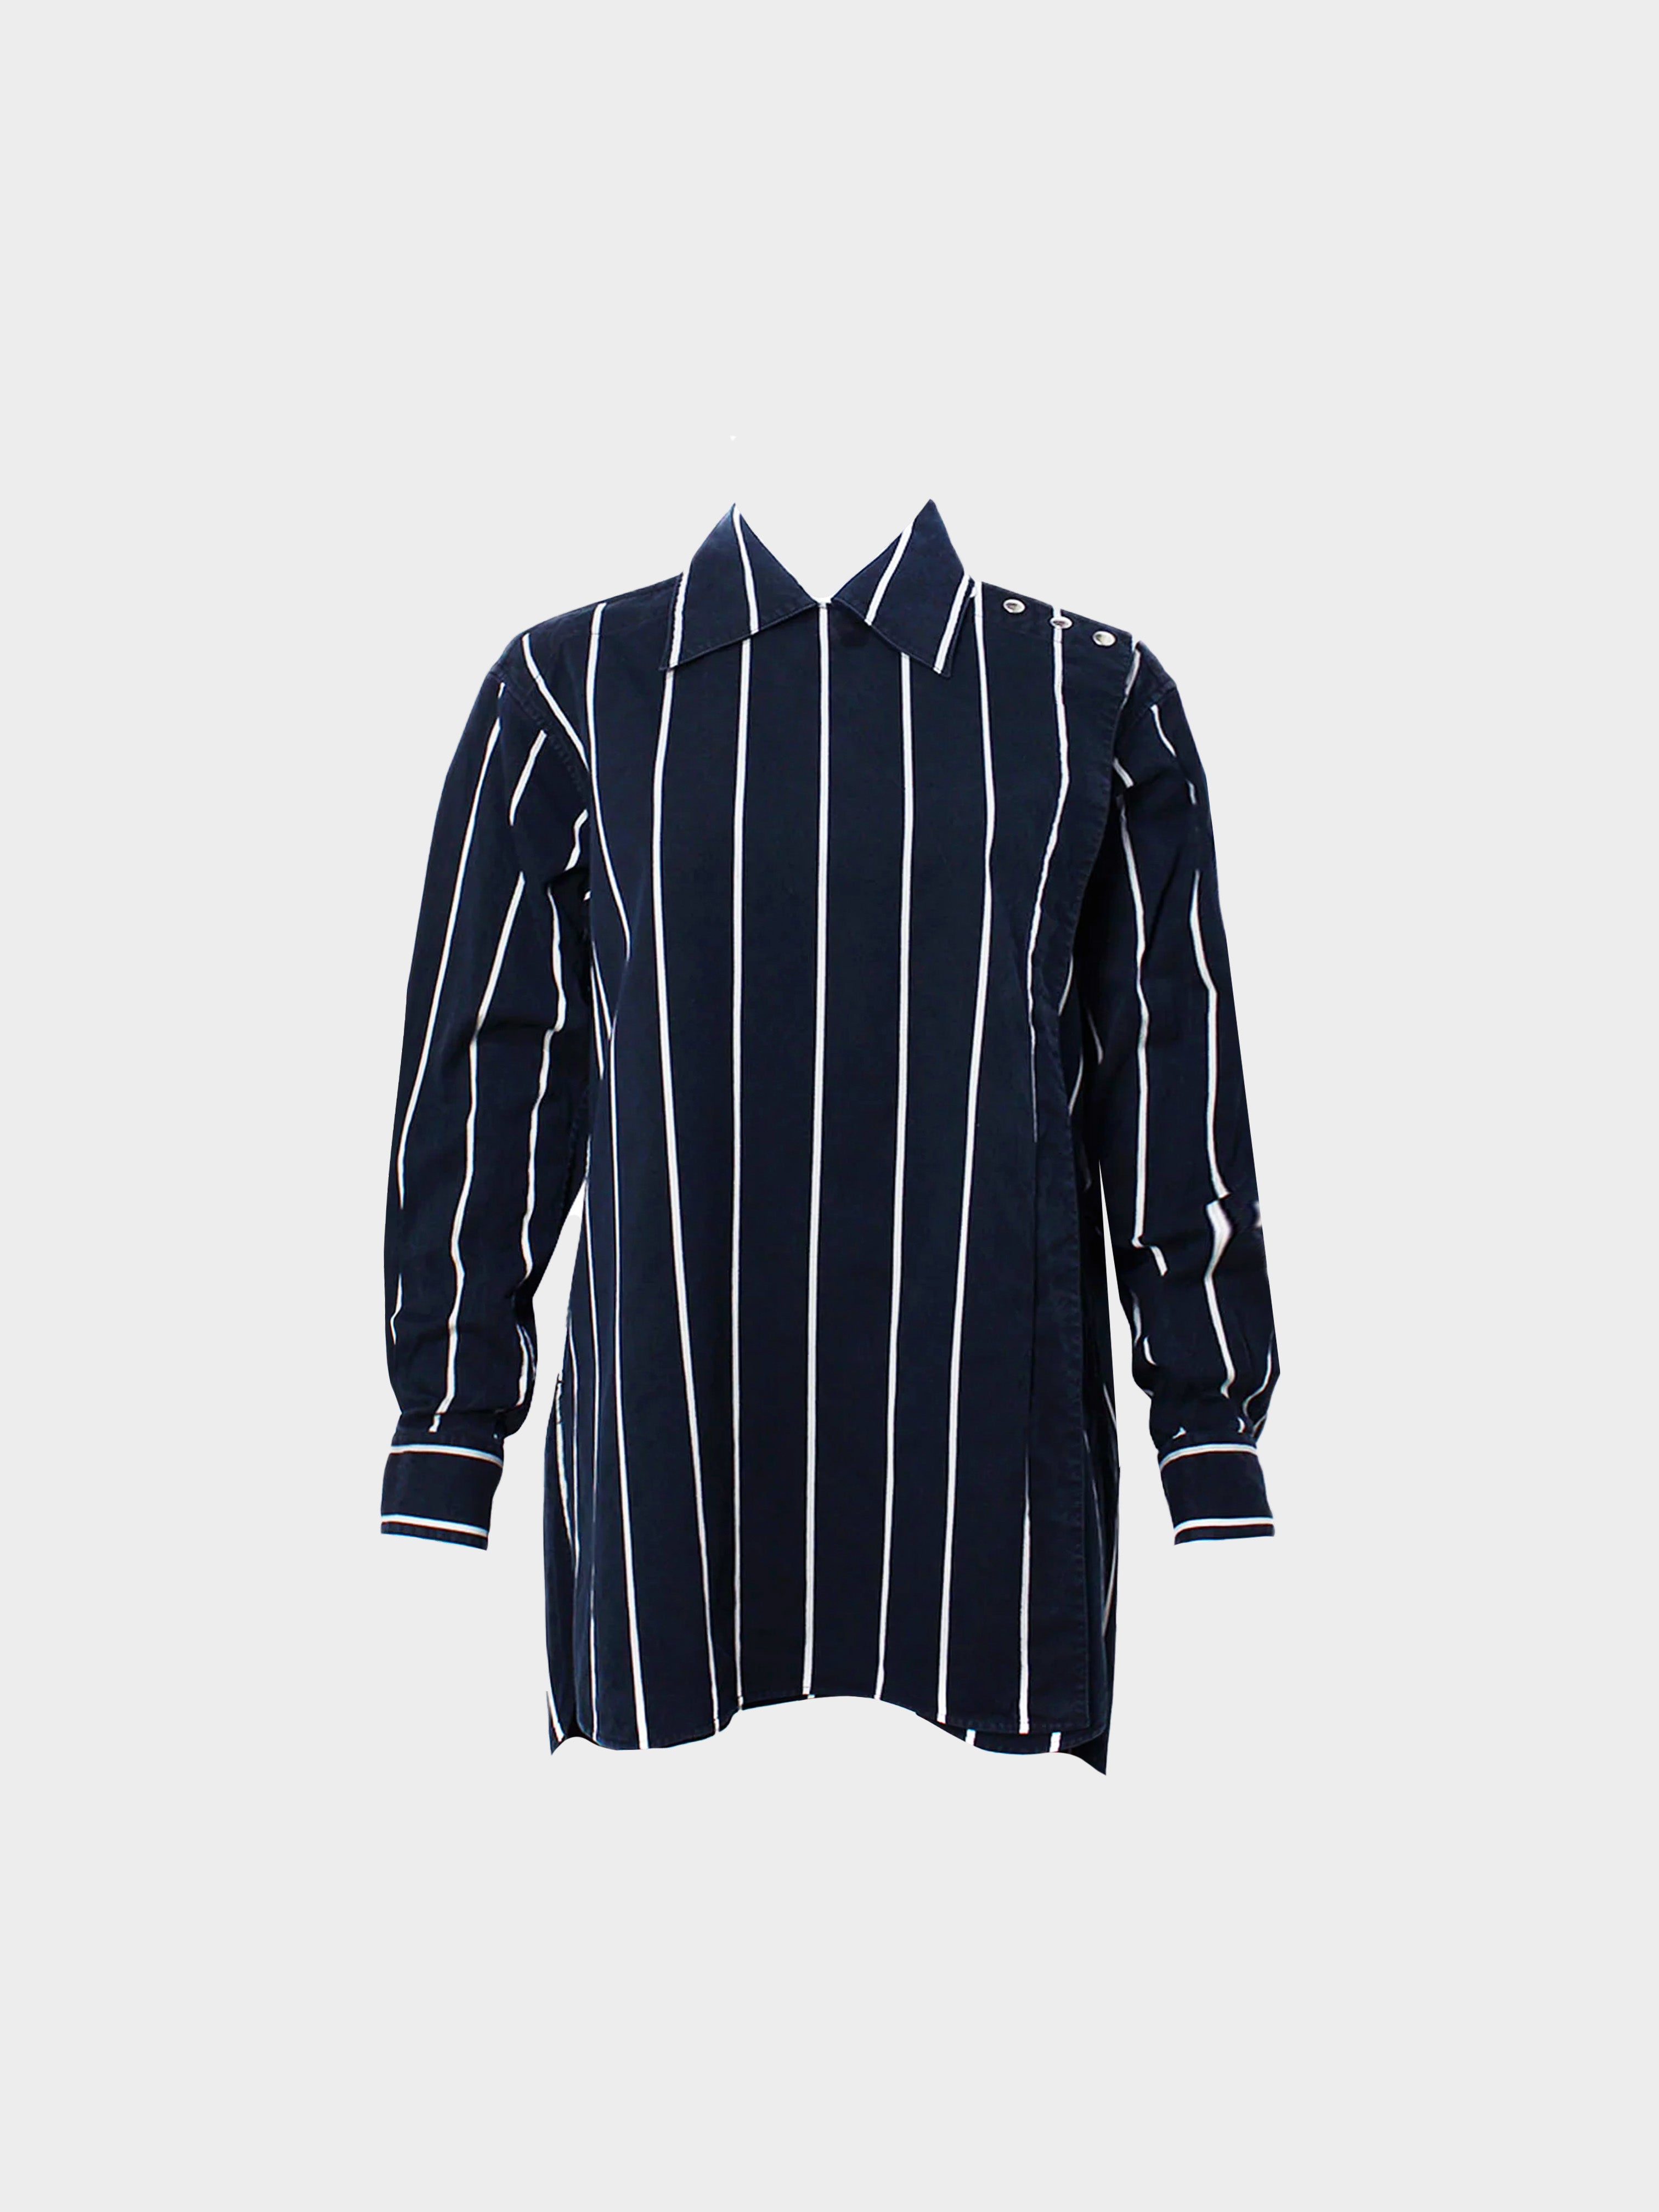 Céline by Phoebe Philo SS 2018 Navy Striped Top · INTO